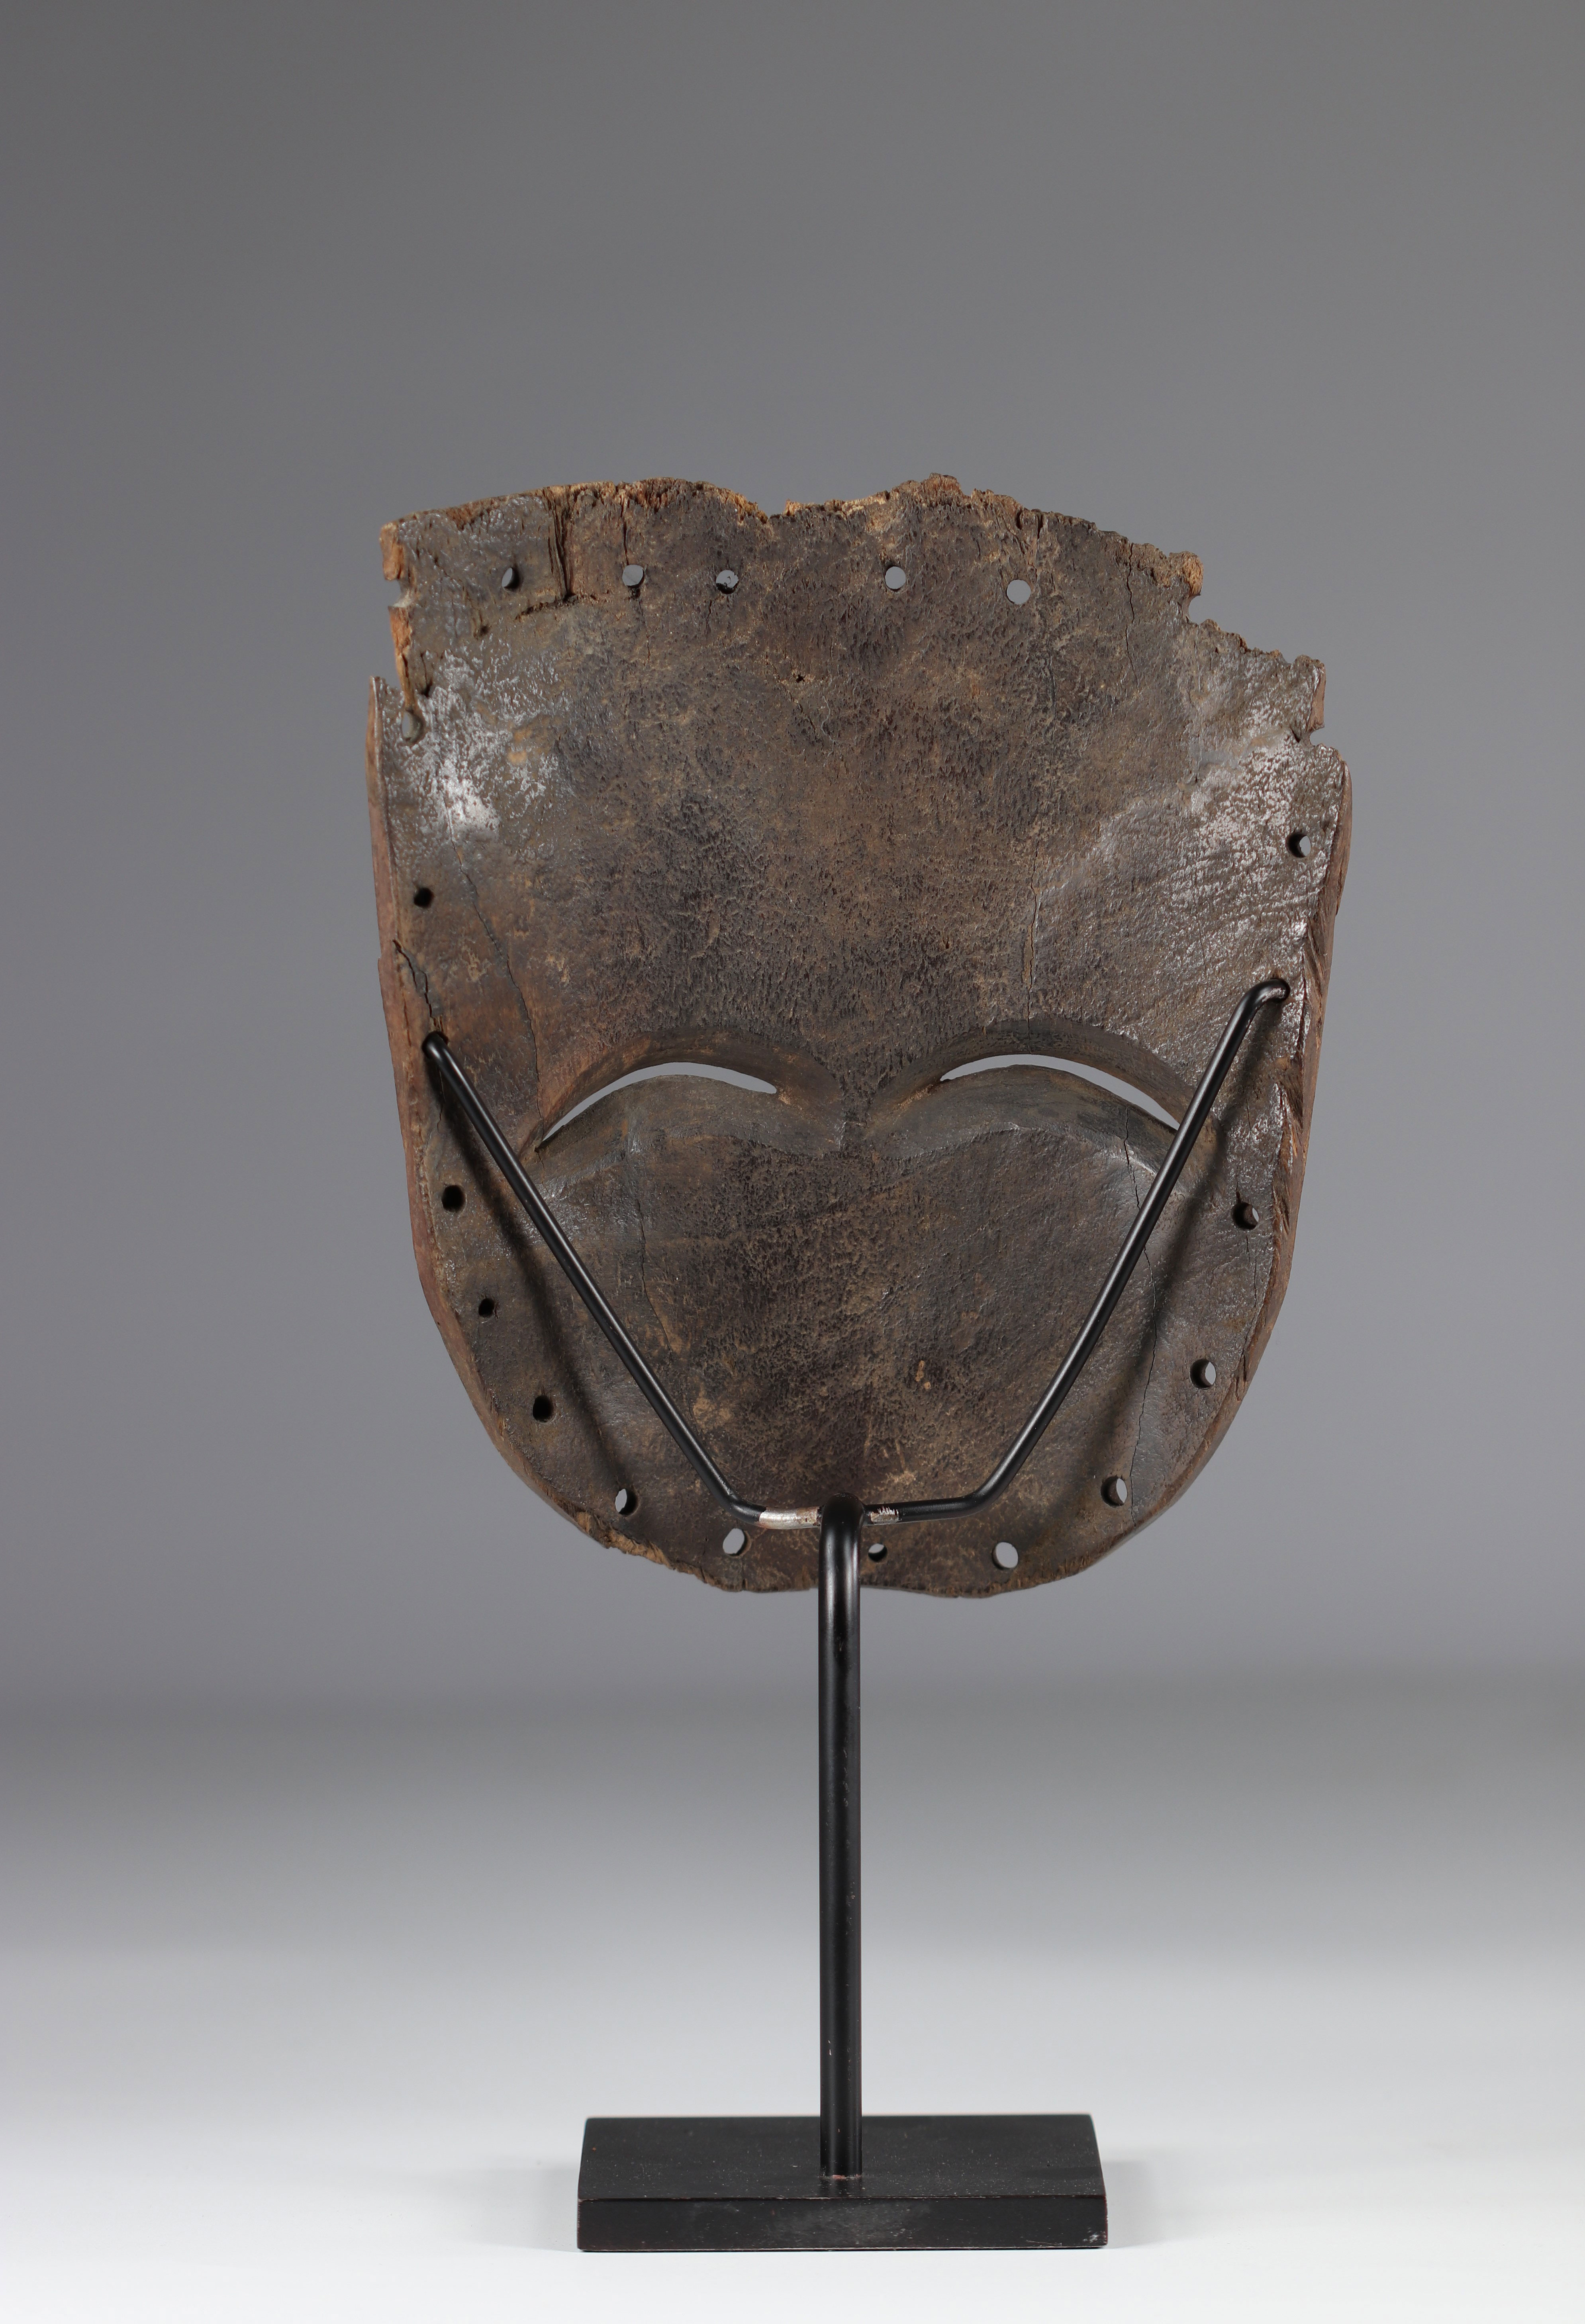 Rare and very old Lele mask - DRC, traces of use, natural pigments from the early 20th century - Image 5 of 5